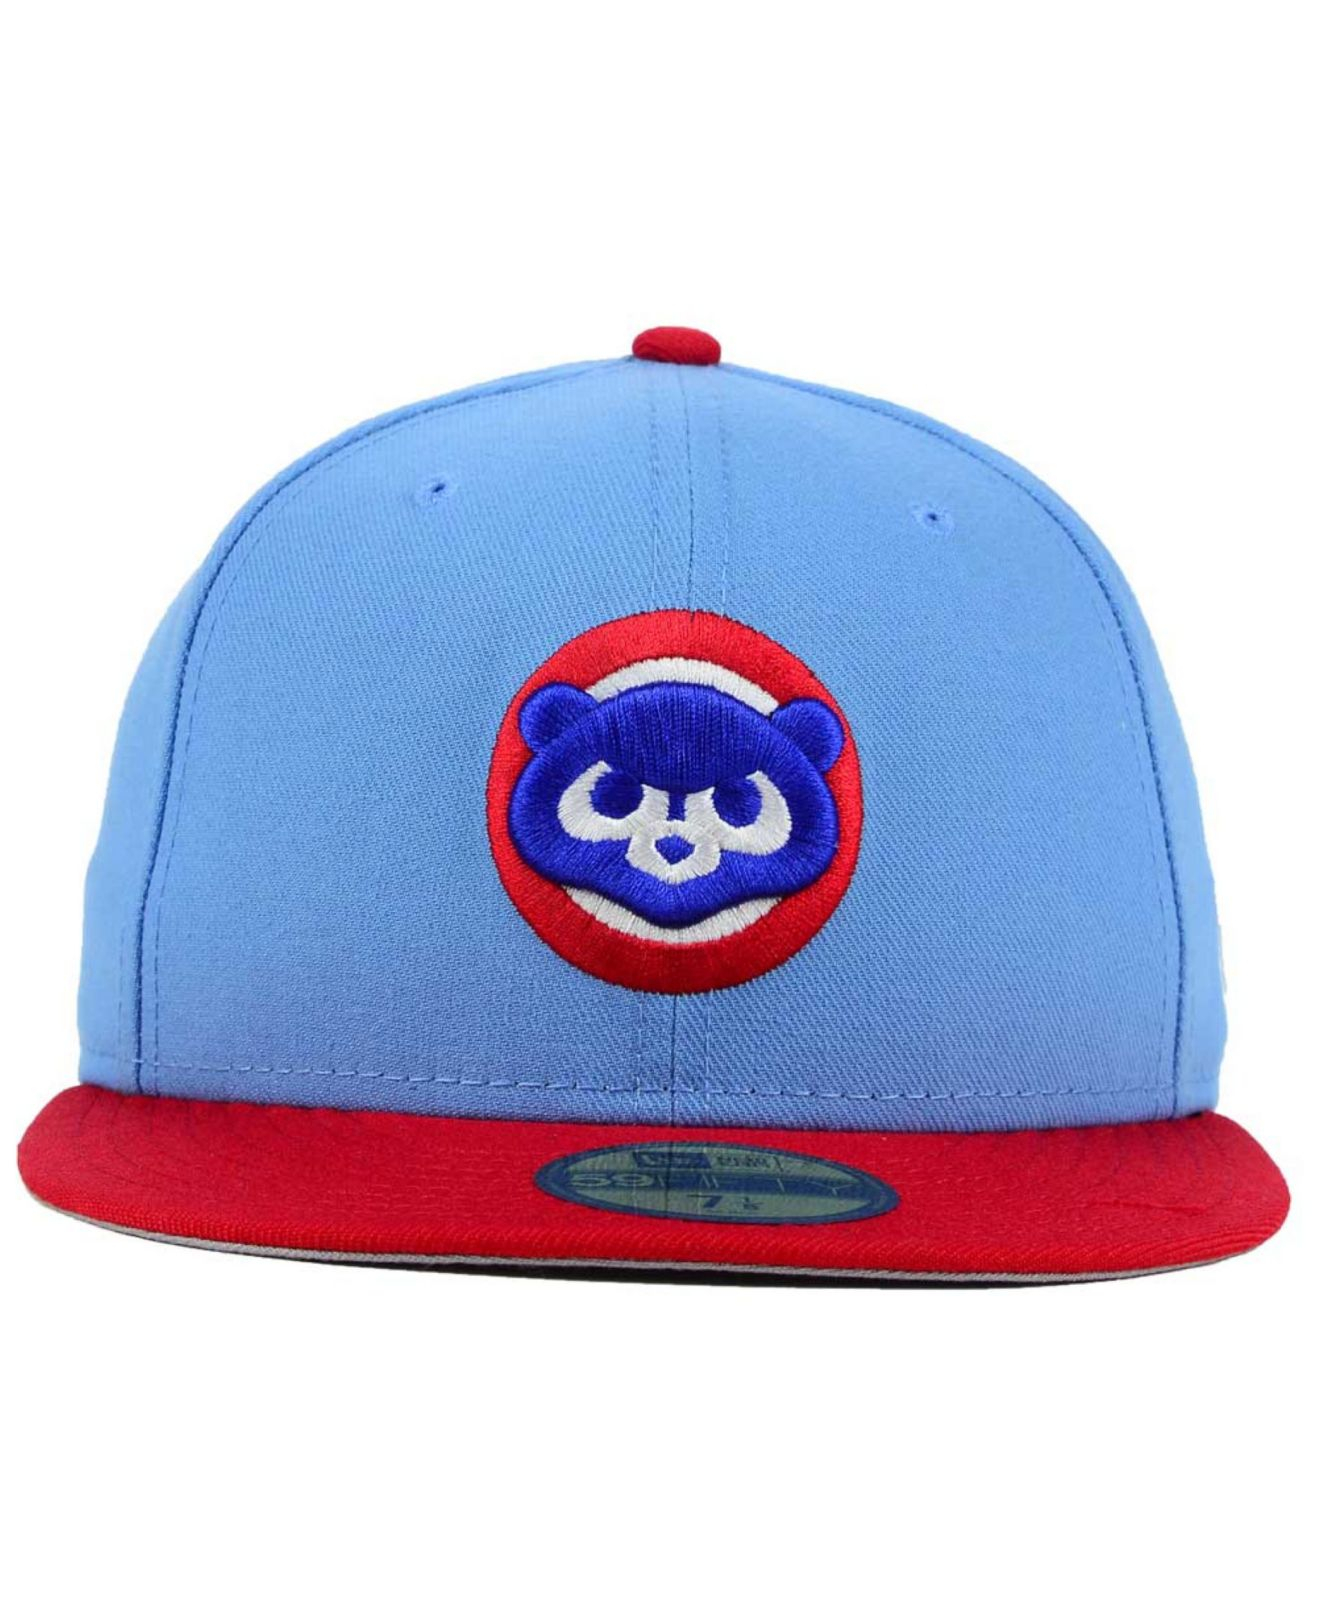 Chicago Cubs Cooperstown Collection Hat New Era 59fifty 7 Cap Standing Bear  Blue